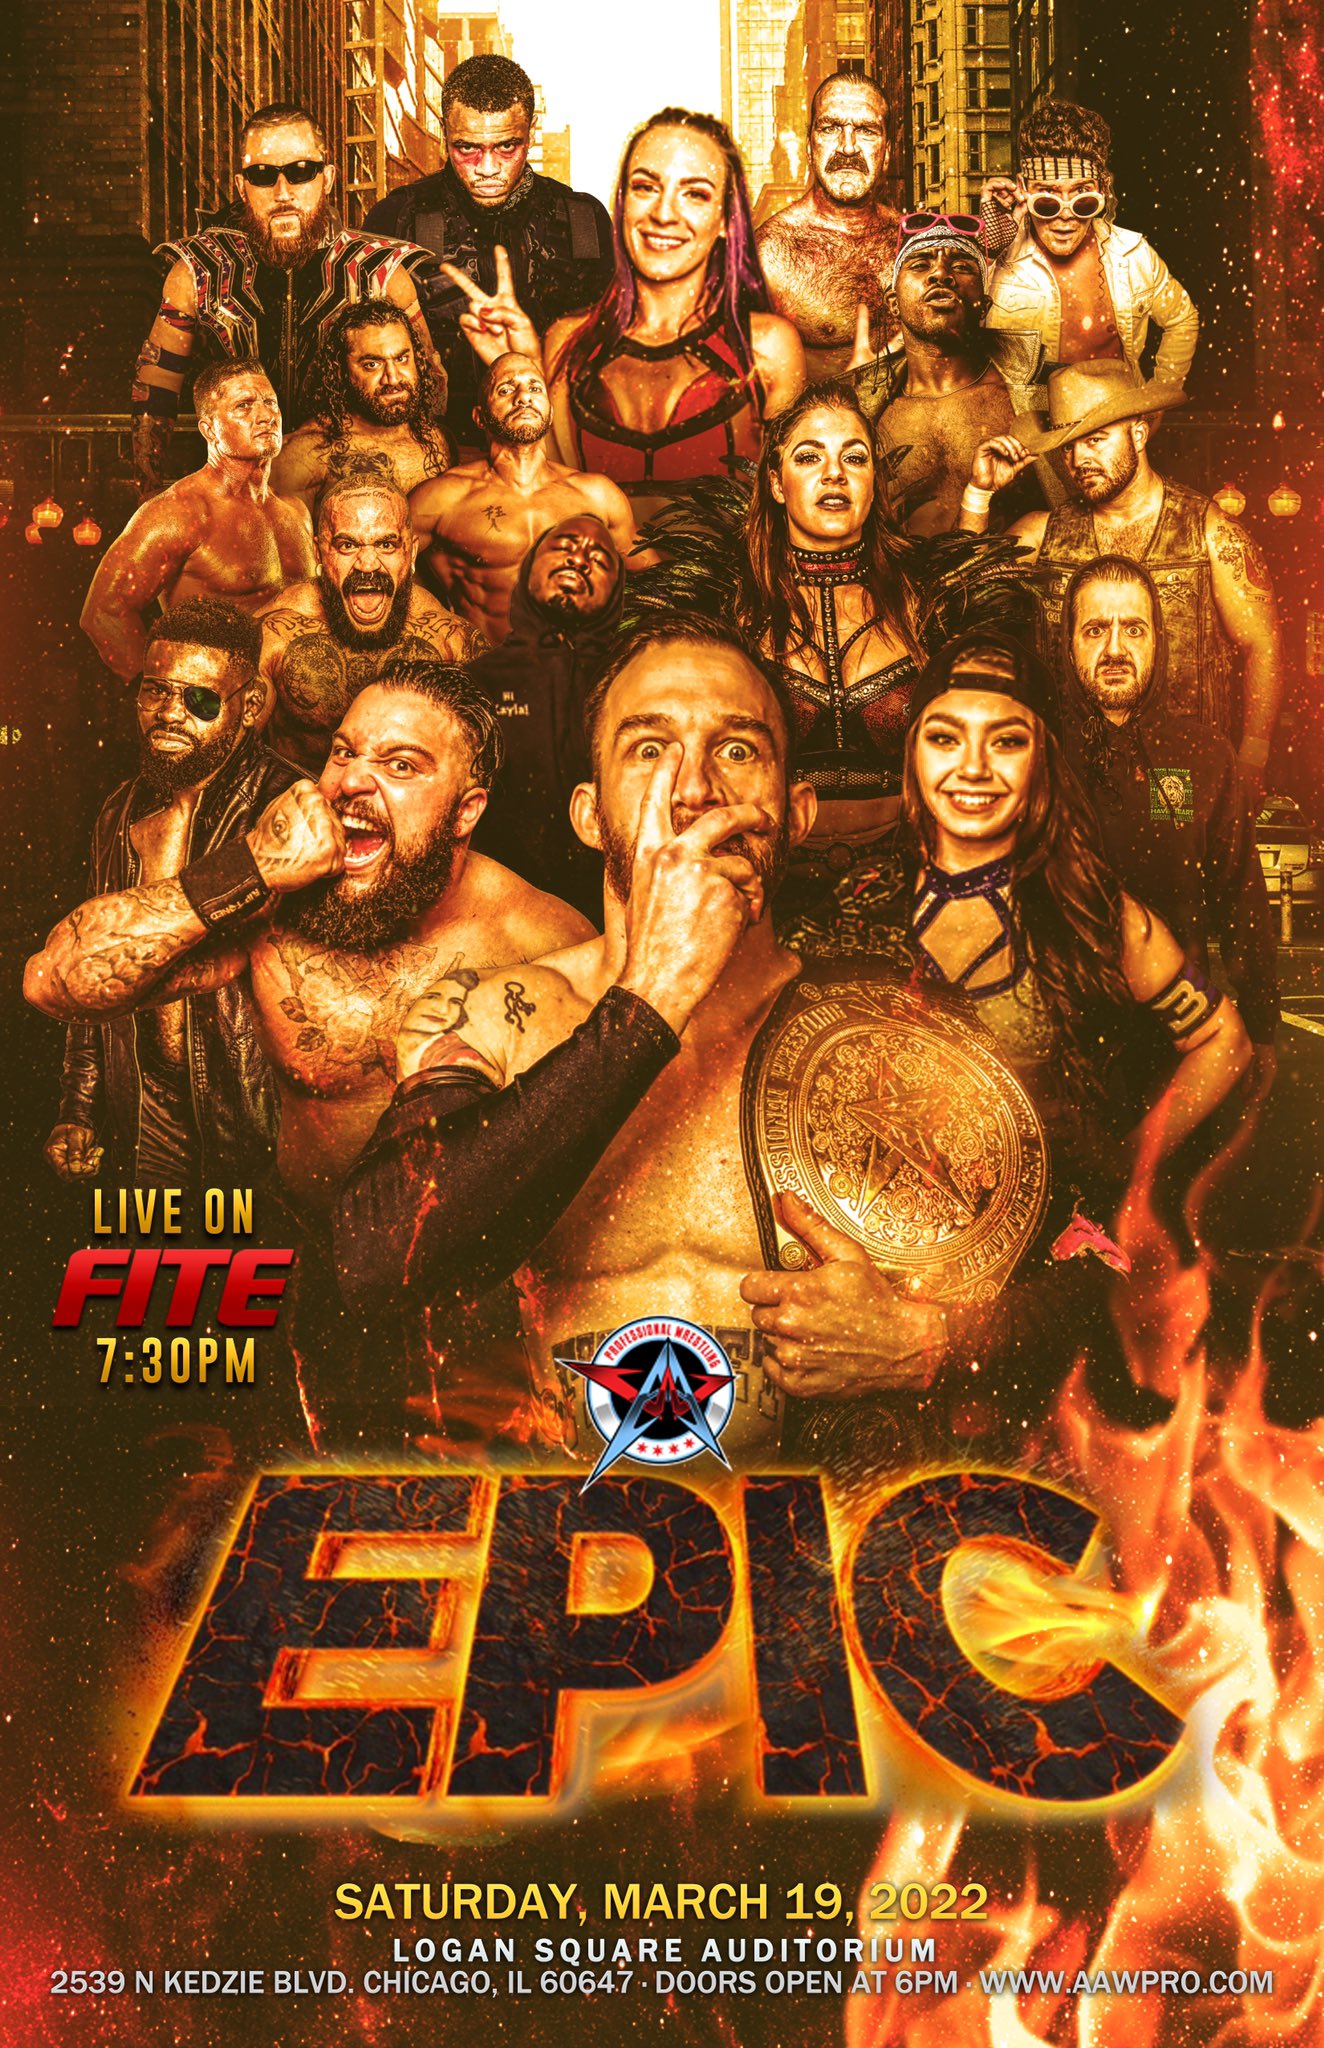 Tickets on Sale Now for EPIC: The 18th Anniversary Show